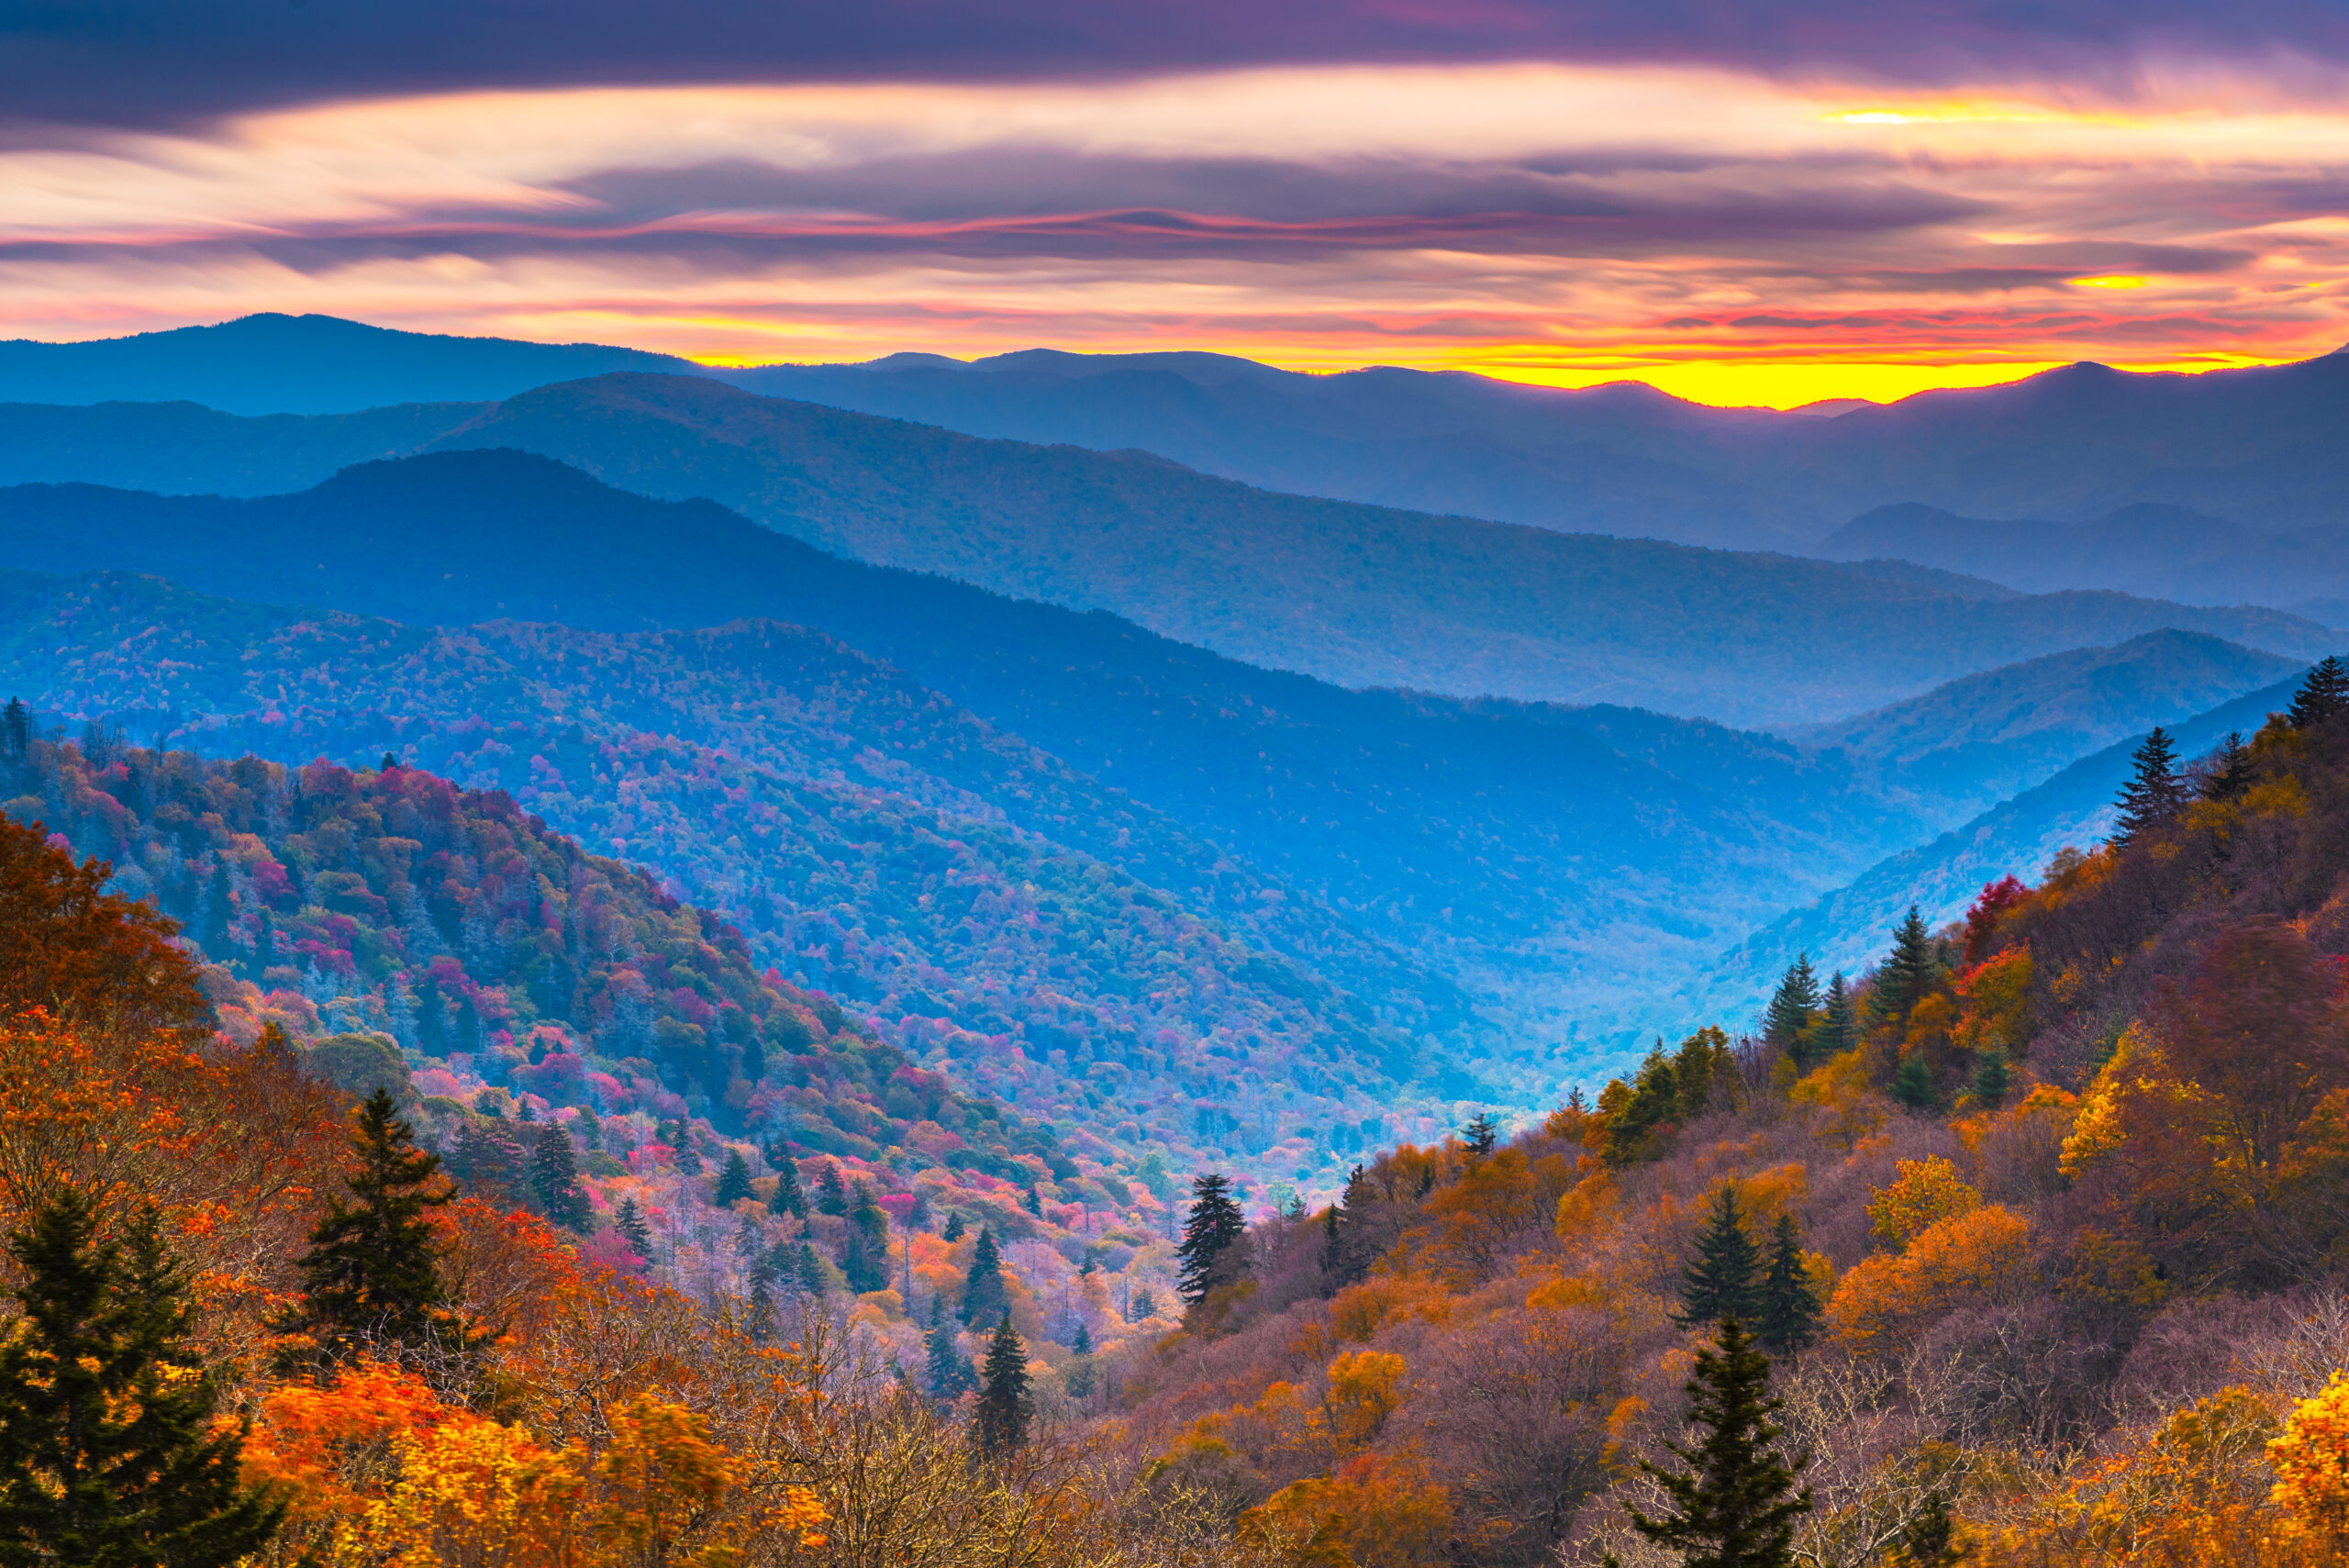 Smoky Mountains National Park in Tennessee, Autumn at dawnSmoky Mountains National Park in Tennessee, Autumn at dawn